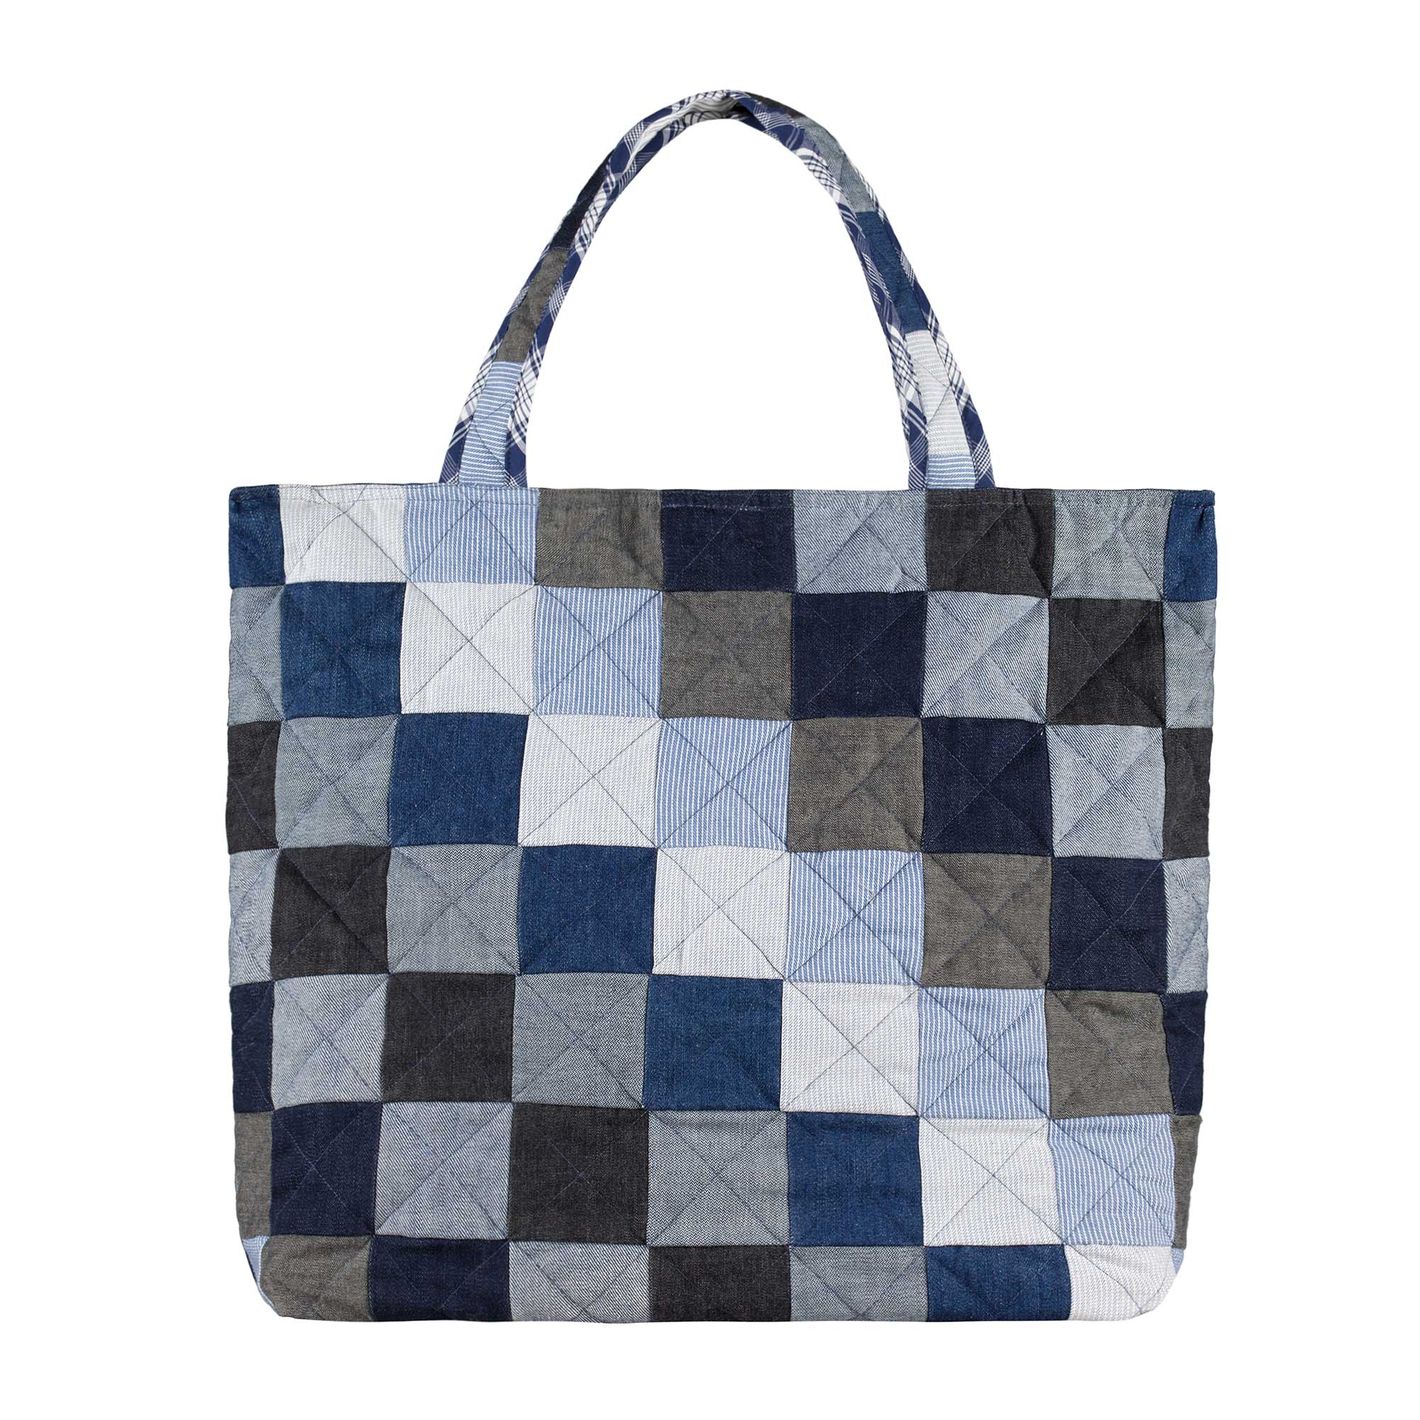 See: A.P.C.’s New Line of Limited-Edition Quilts